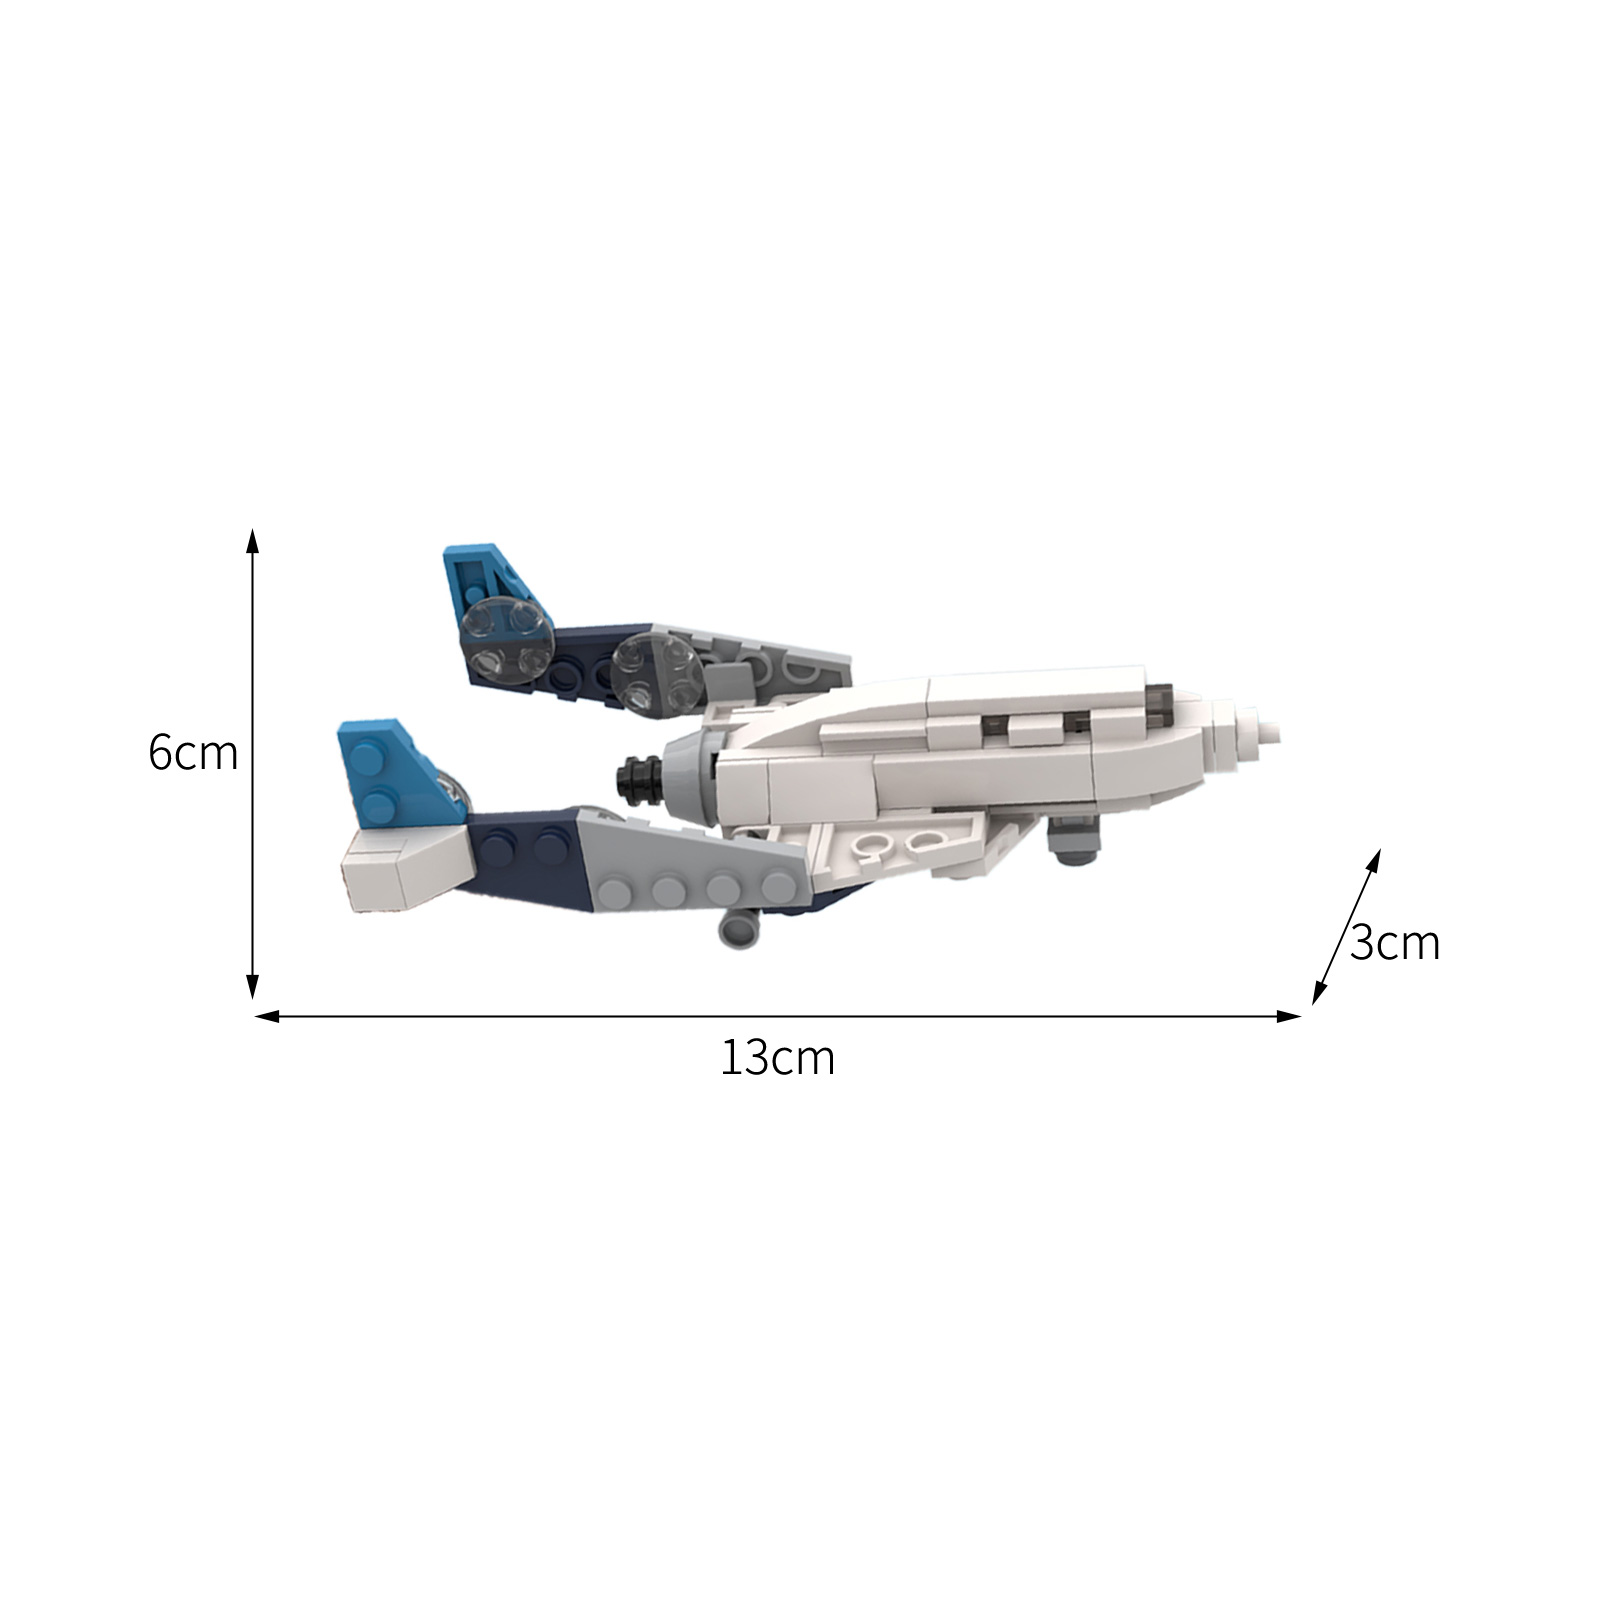 MOCBRICKLAND MOC-49920 Virgin Galactic Spaceship Two VSS Unity [1:110 scale]